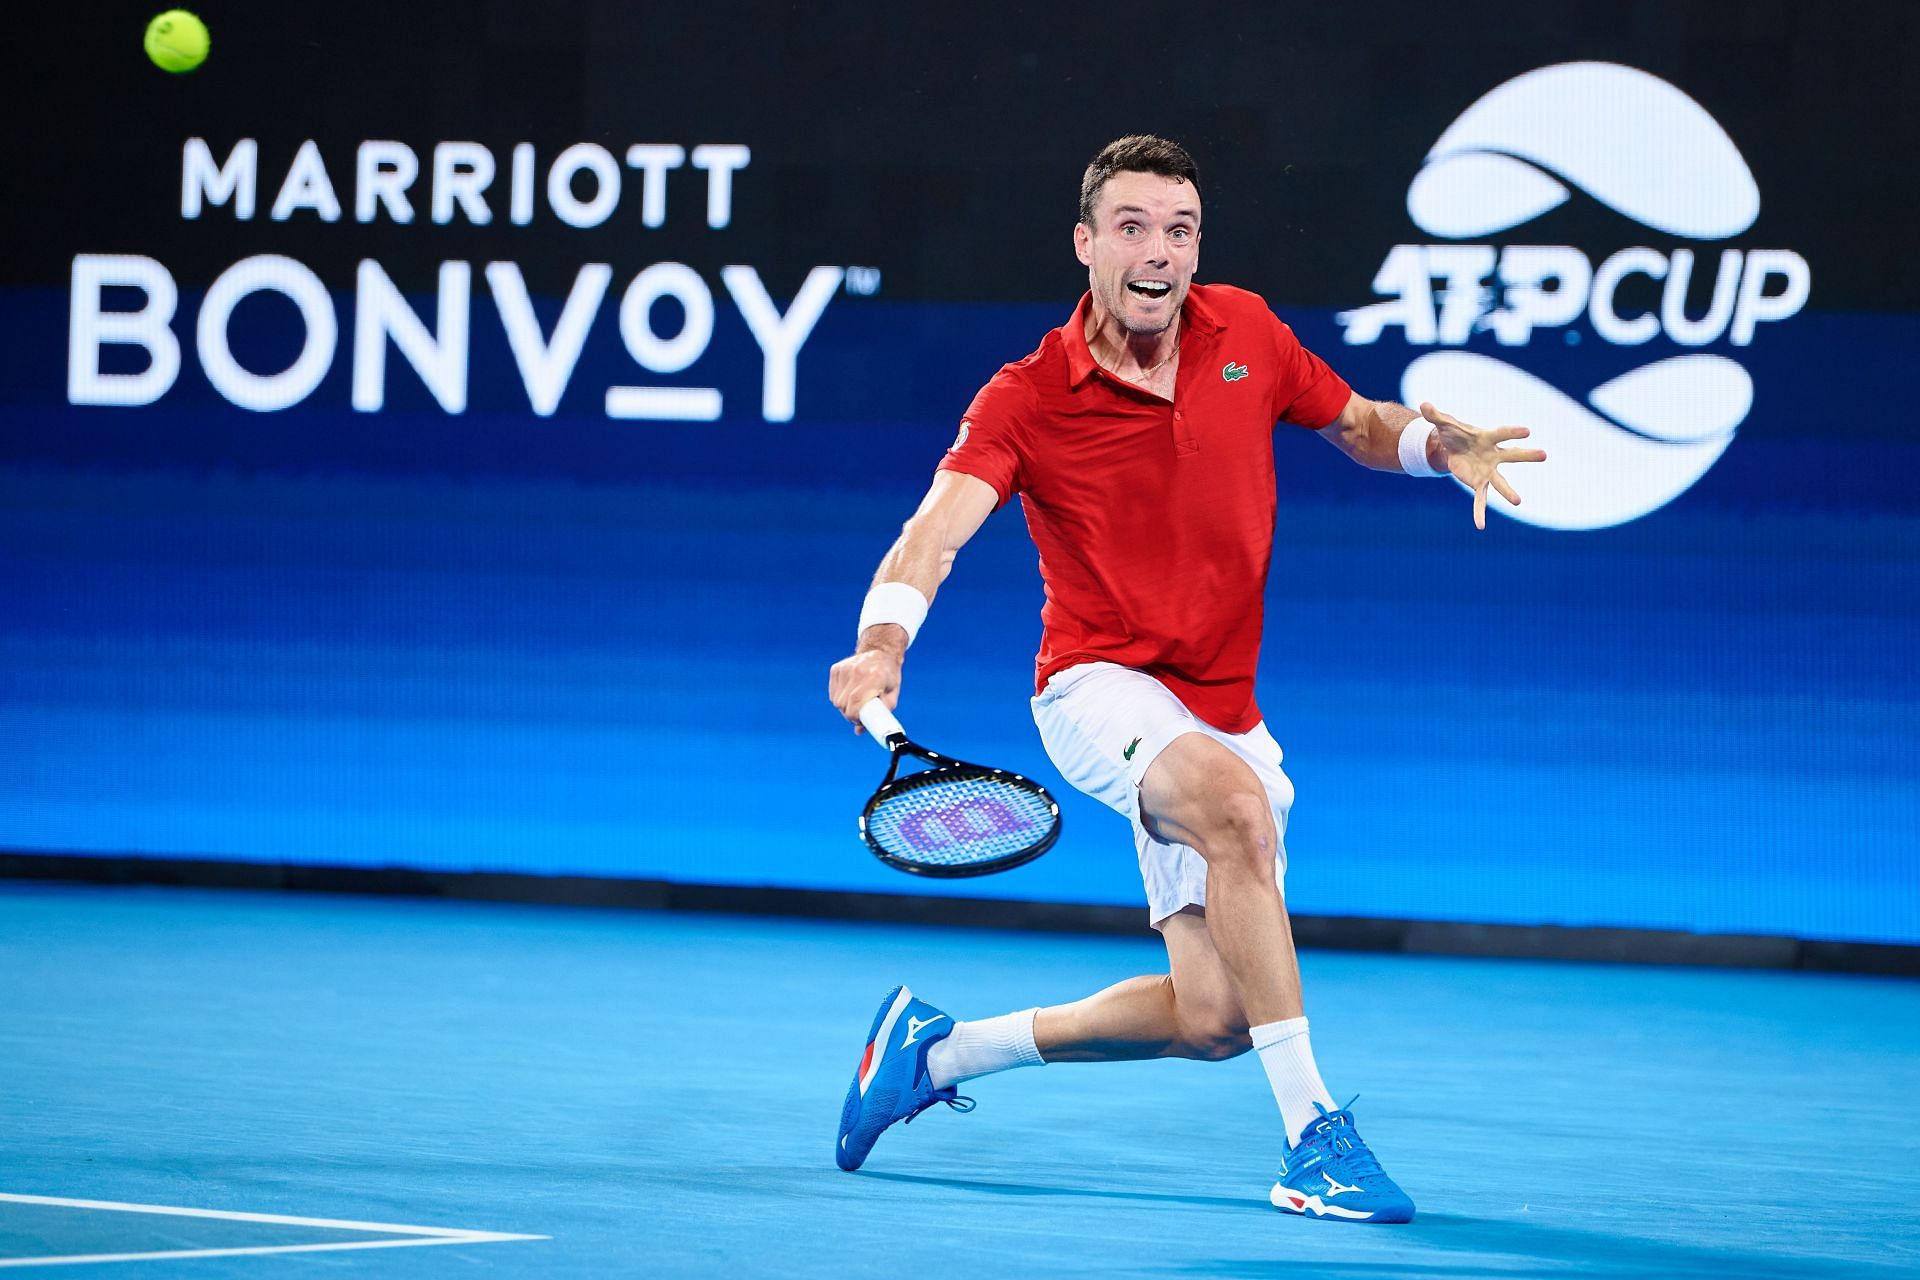 Bautista Agut is the second seed in the tournament